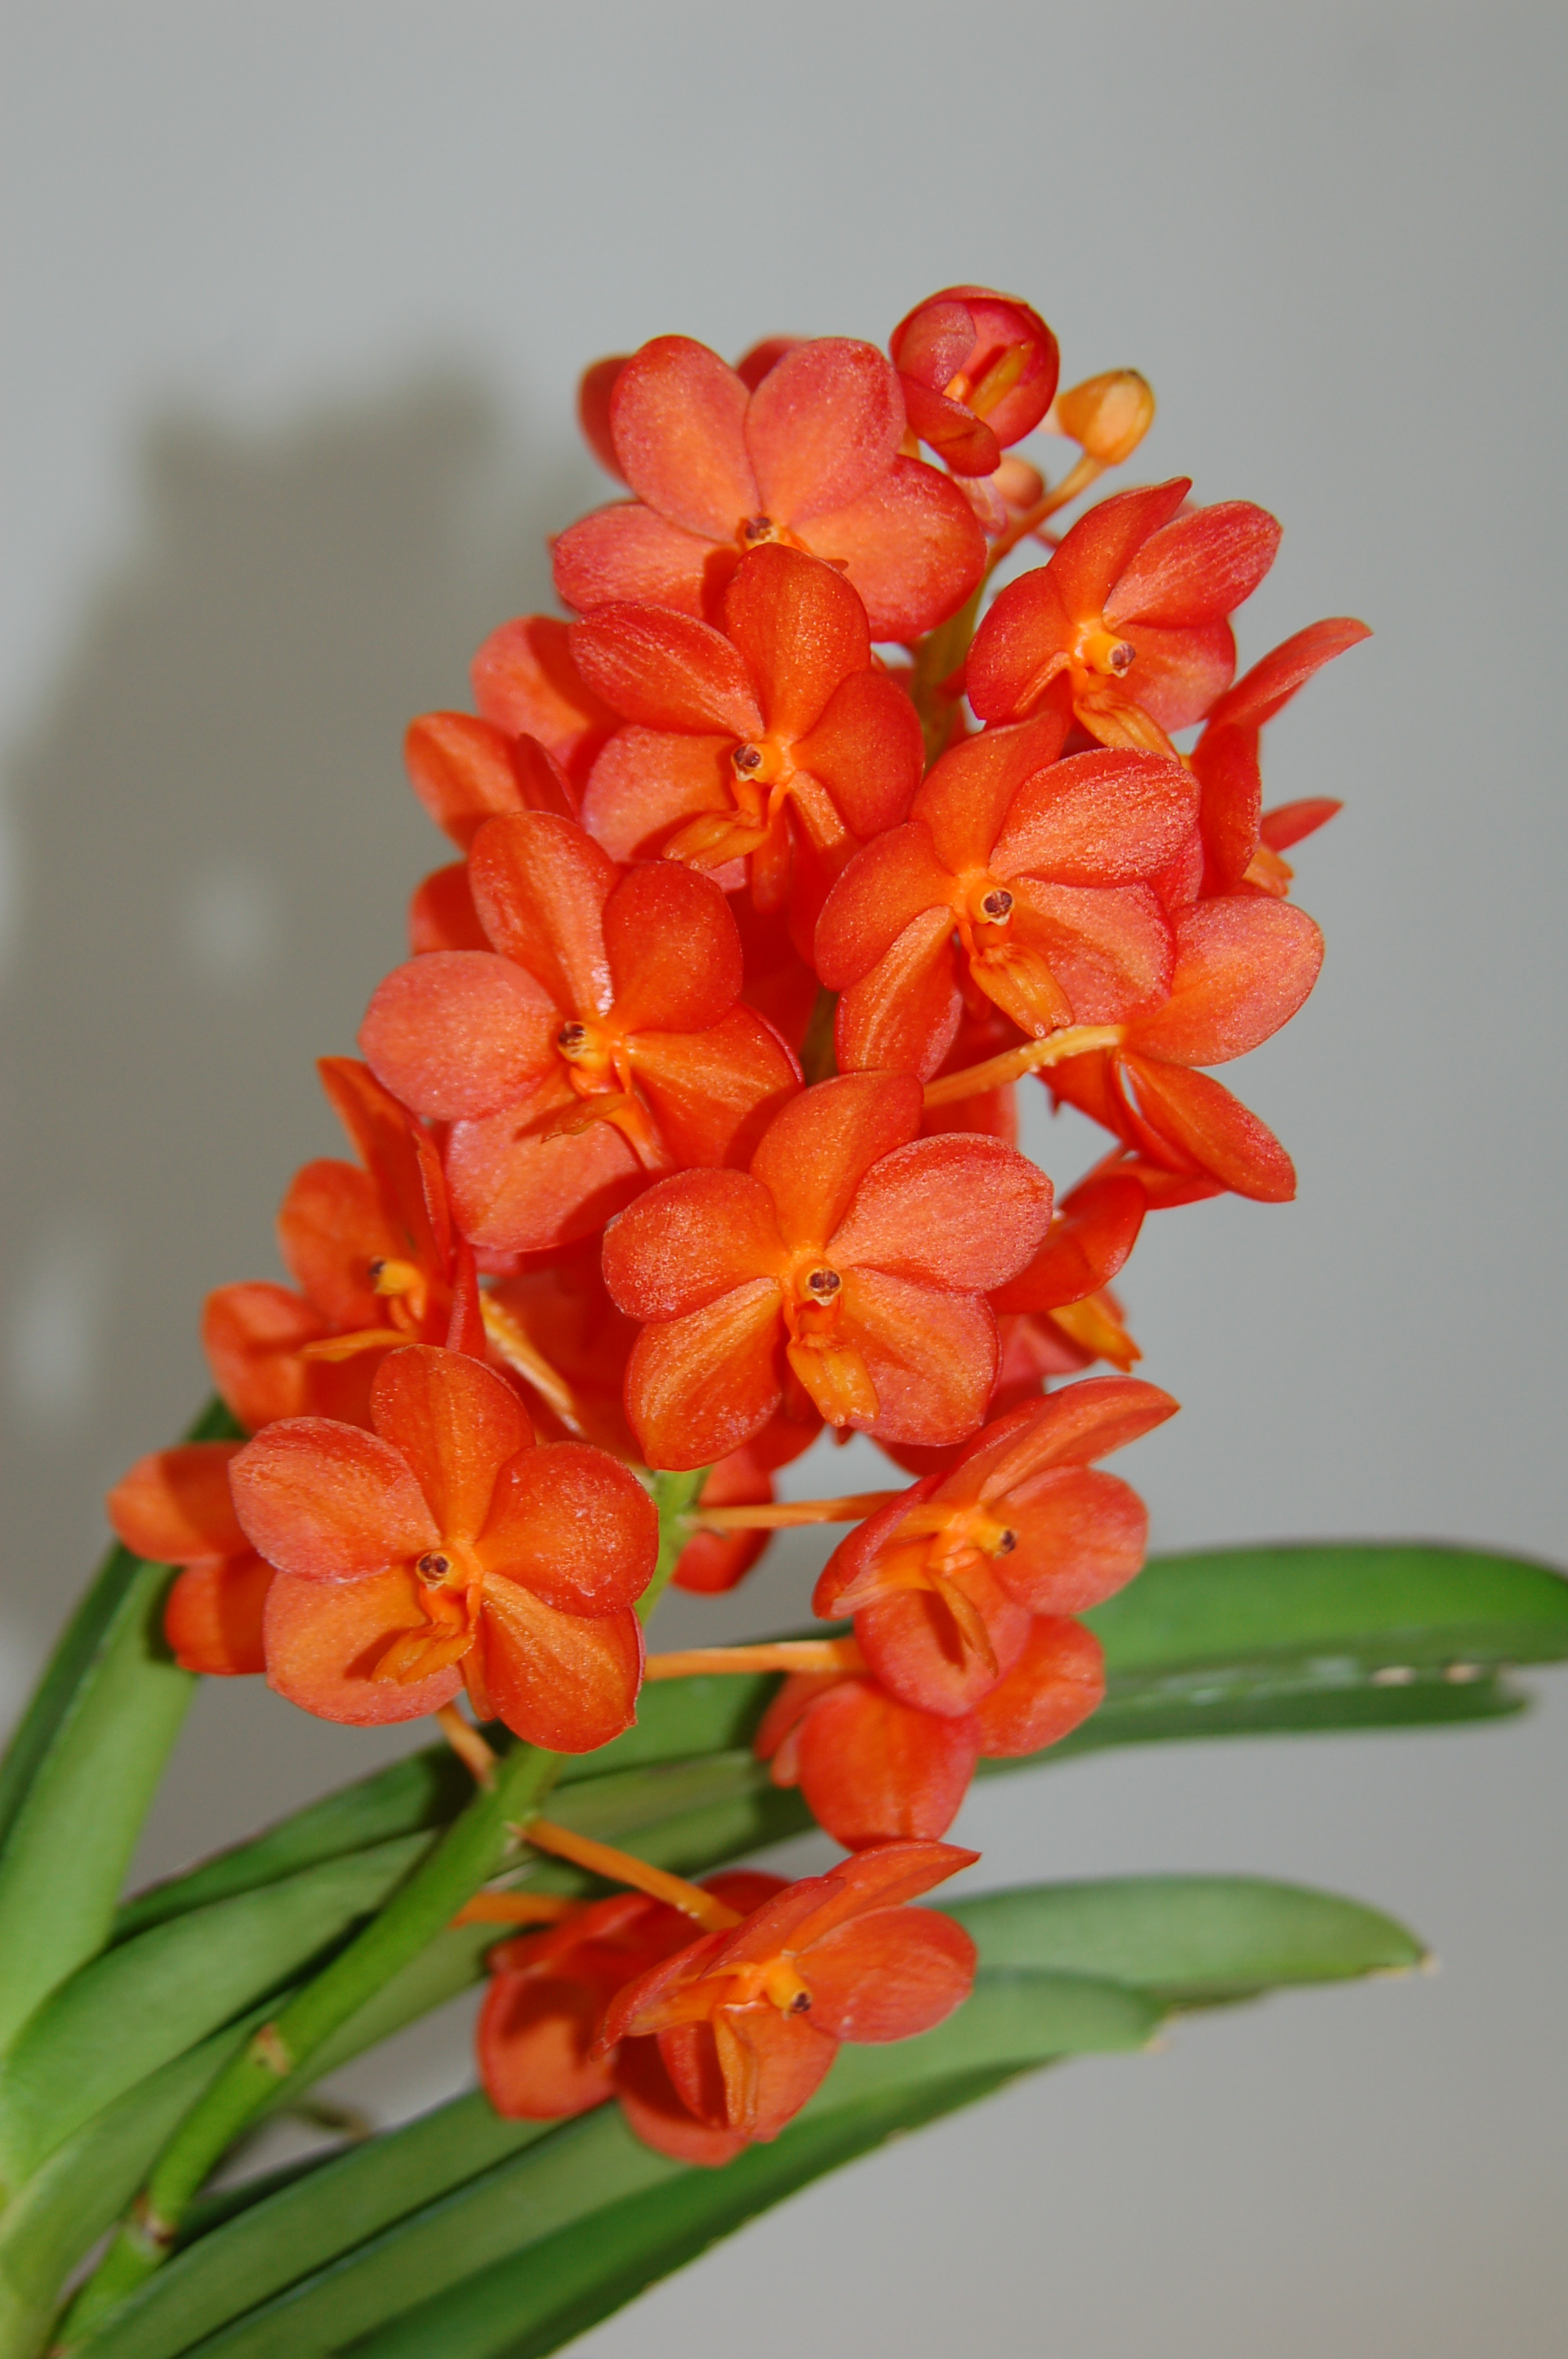 Ascocenda Orange Blossom | Orchideen-Wichmann.de - Highest horticultural  quality and experience since 1897